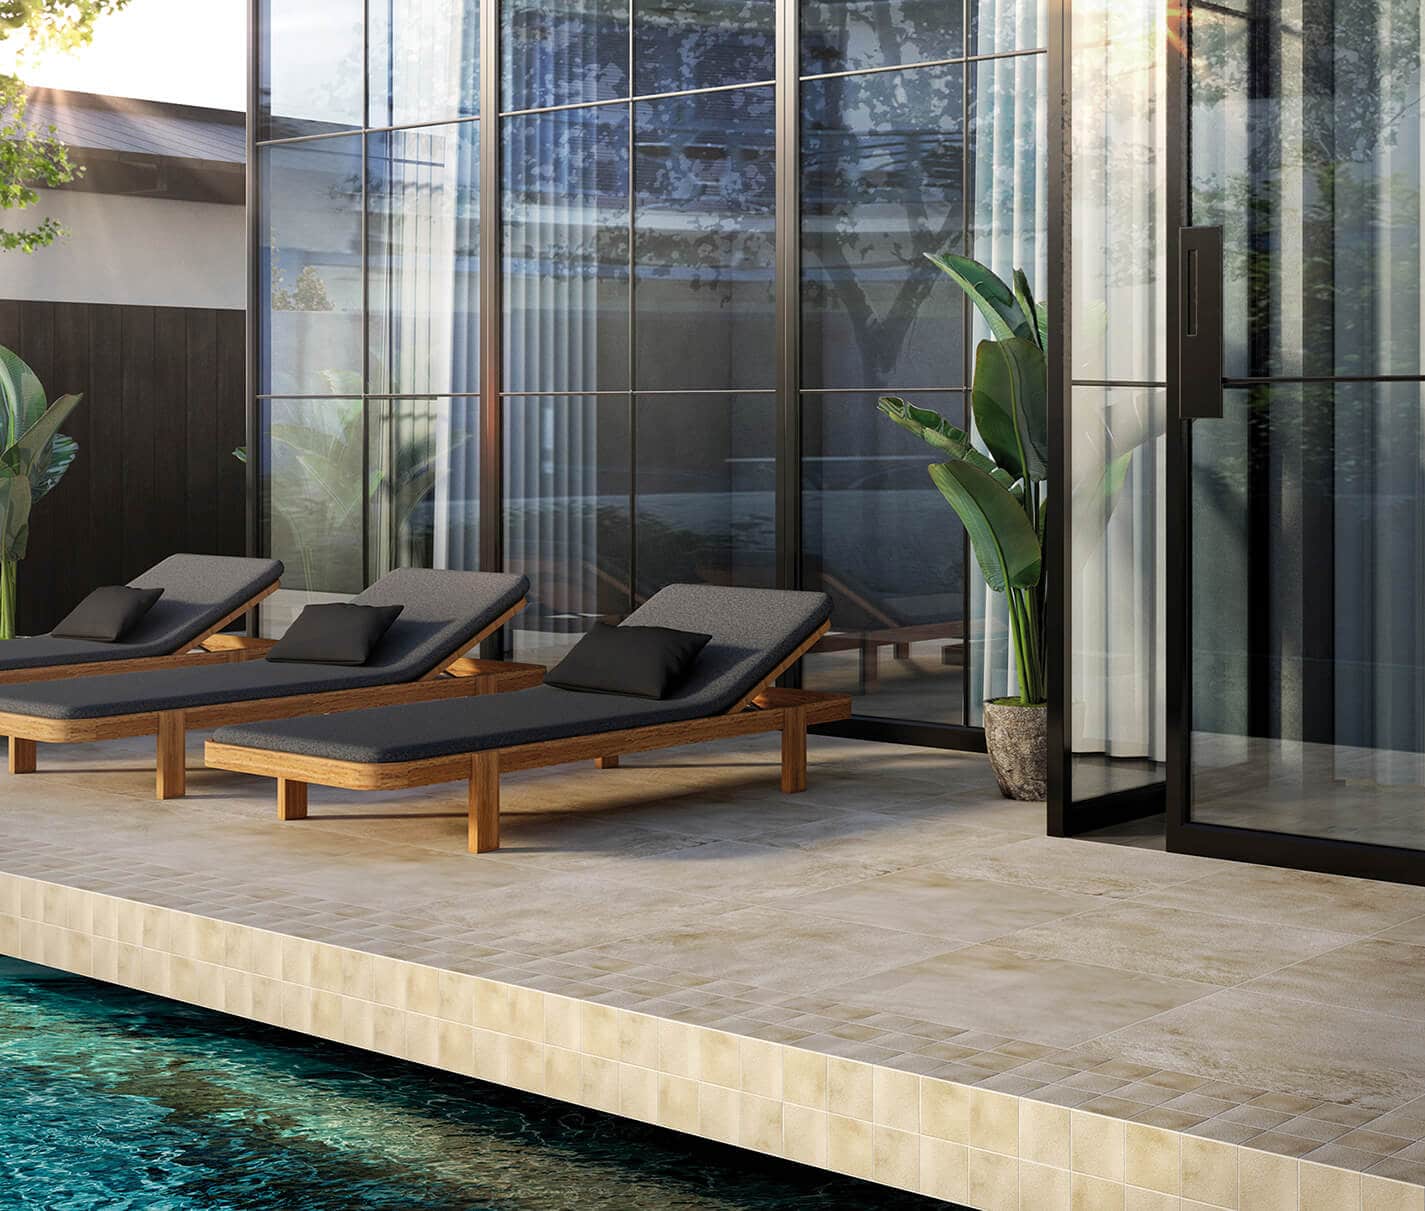 Outdoor swimming pool hotel area with brown, natural-look tiles